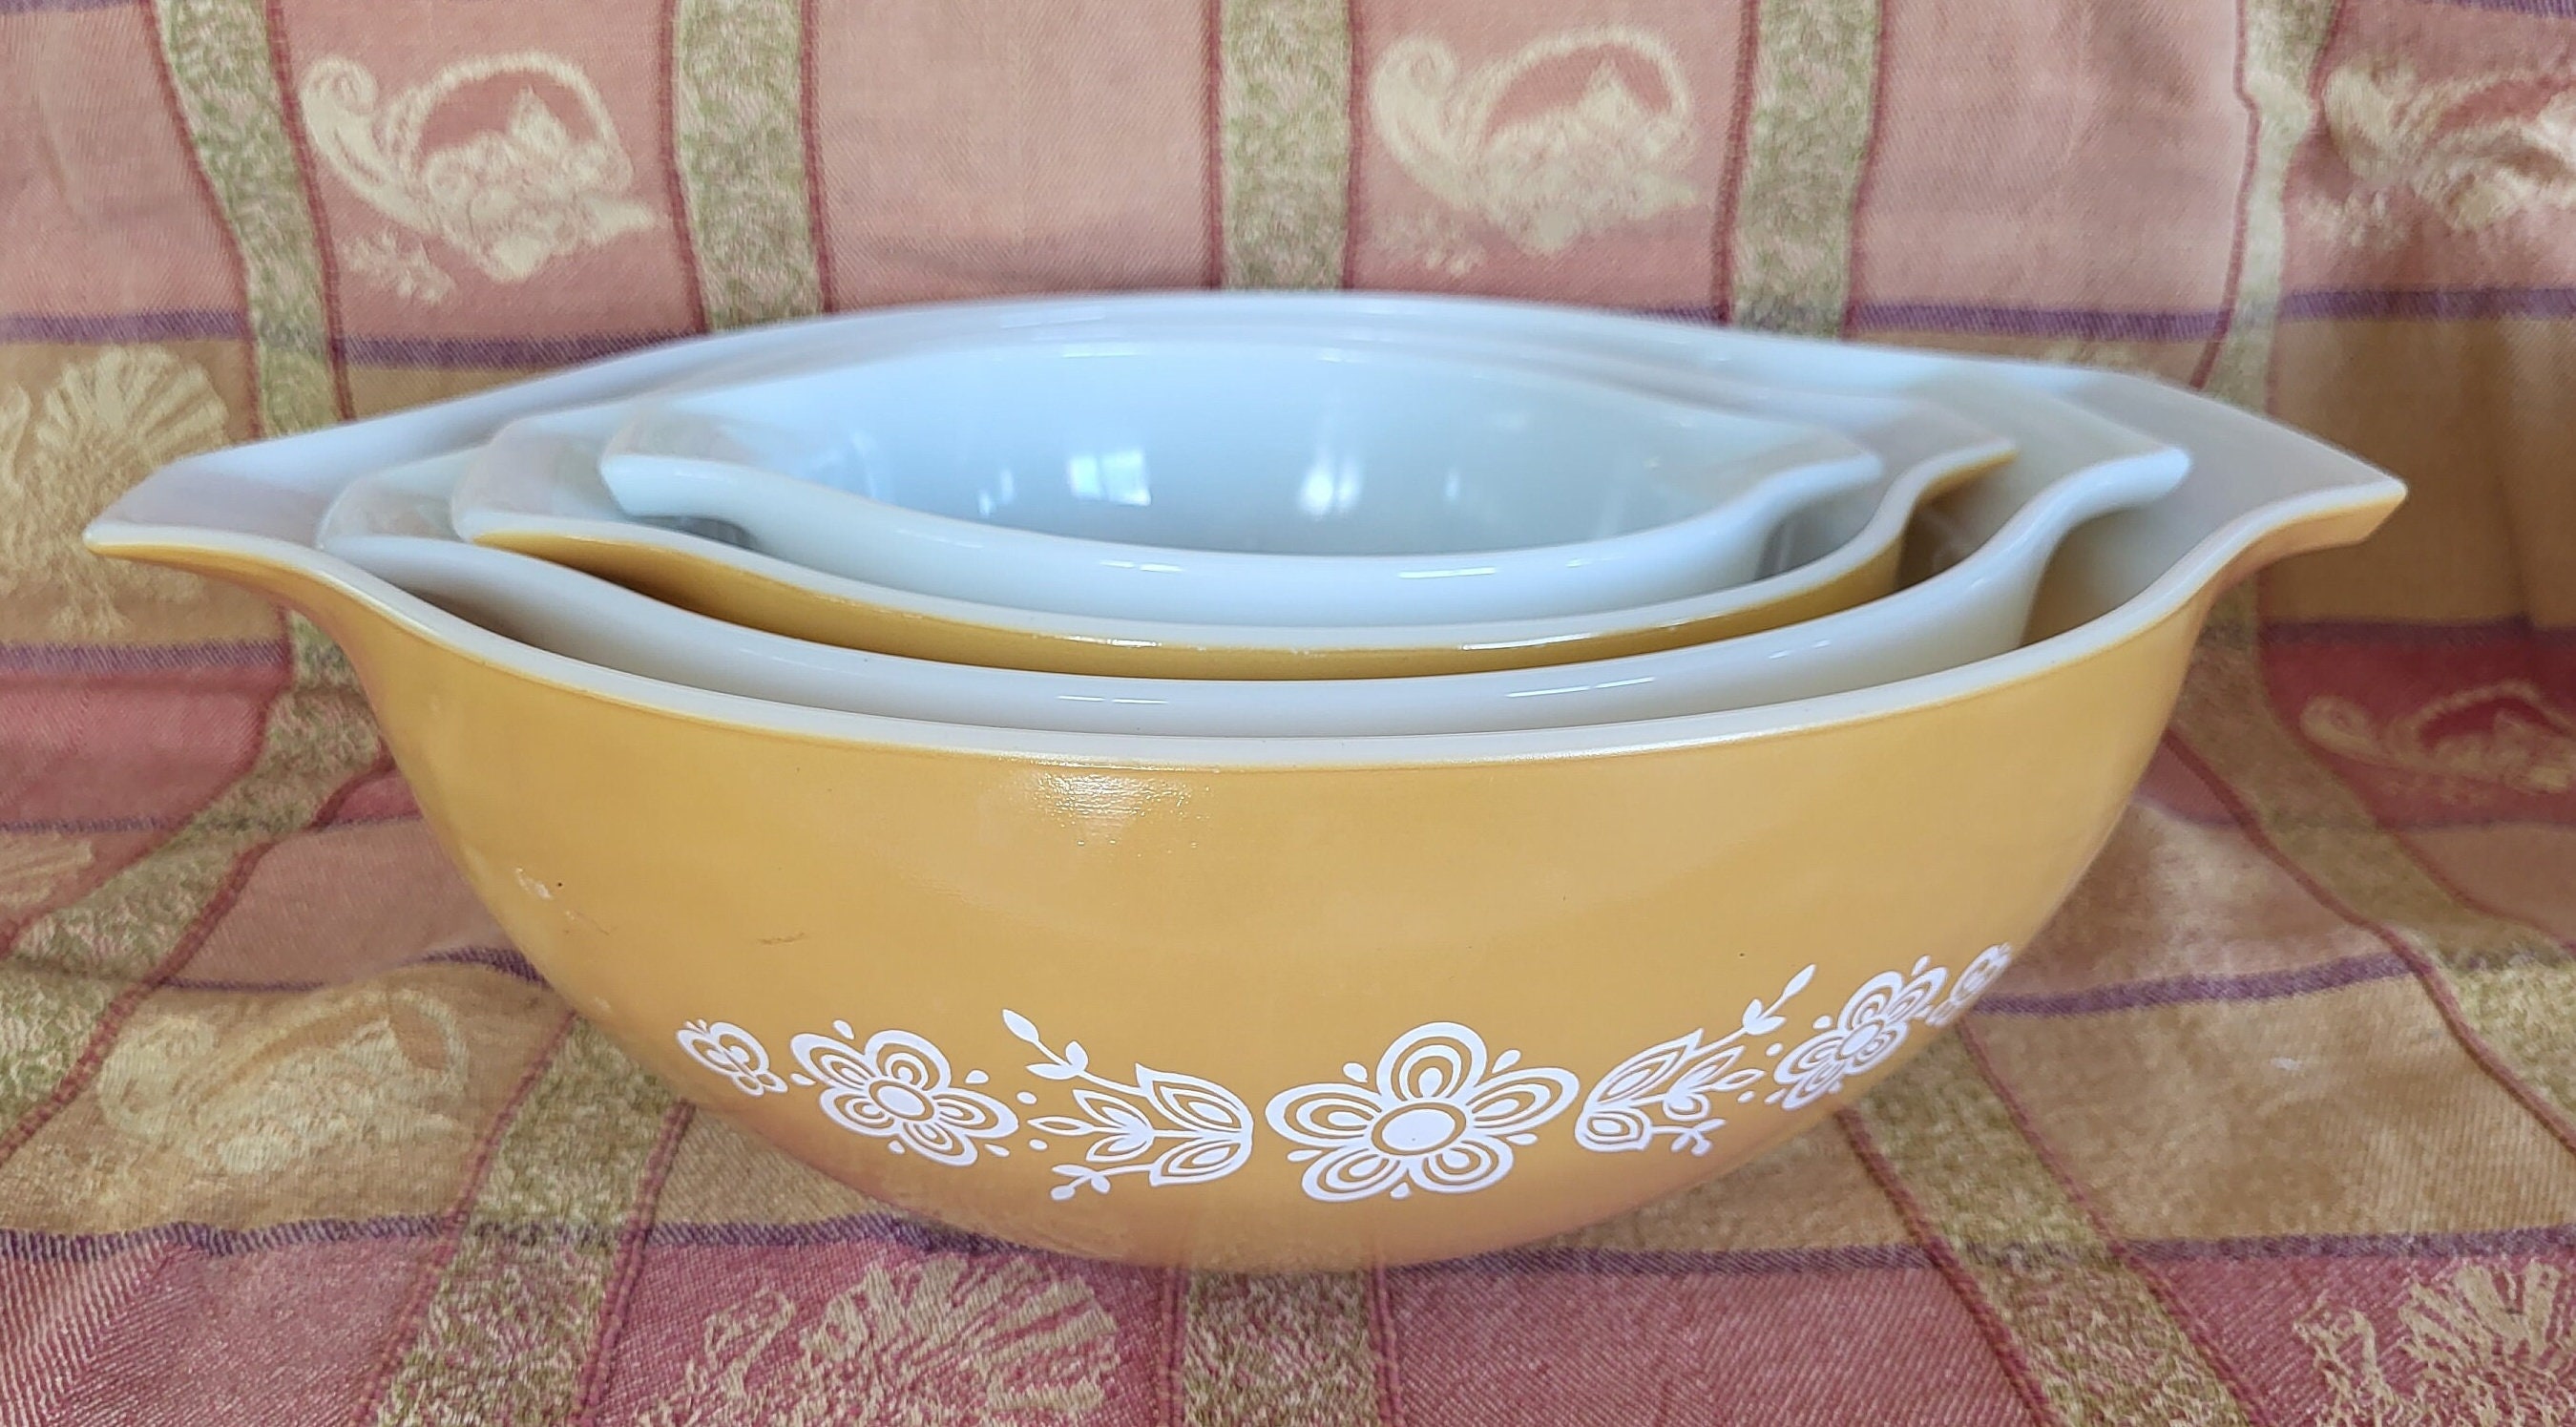 PIONEER WOMAN Bright Set of Colorful Fluted/ Nesting Mixing Bowls 